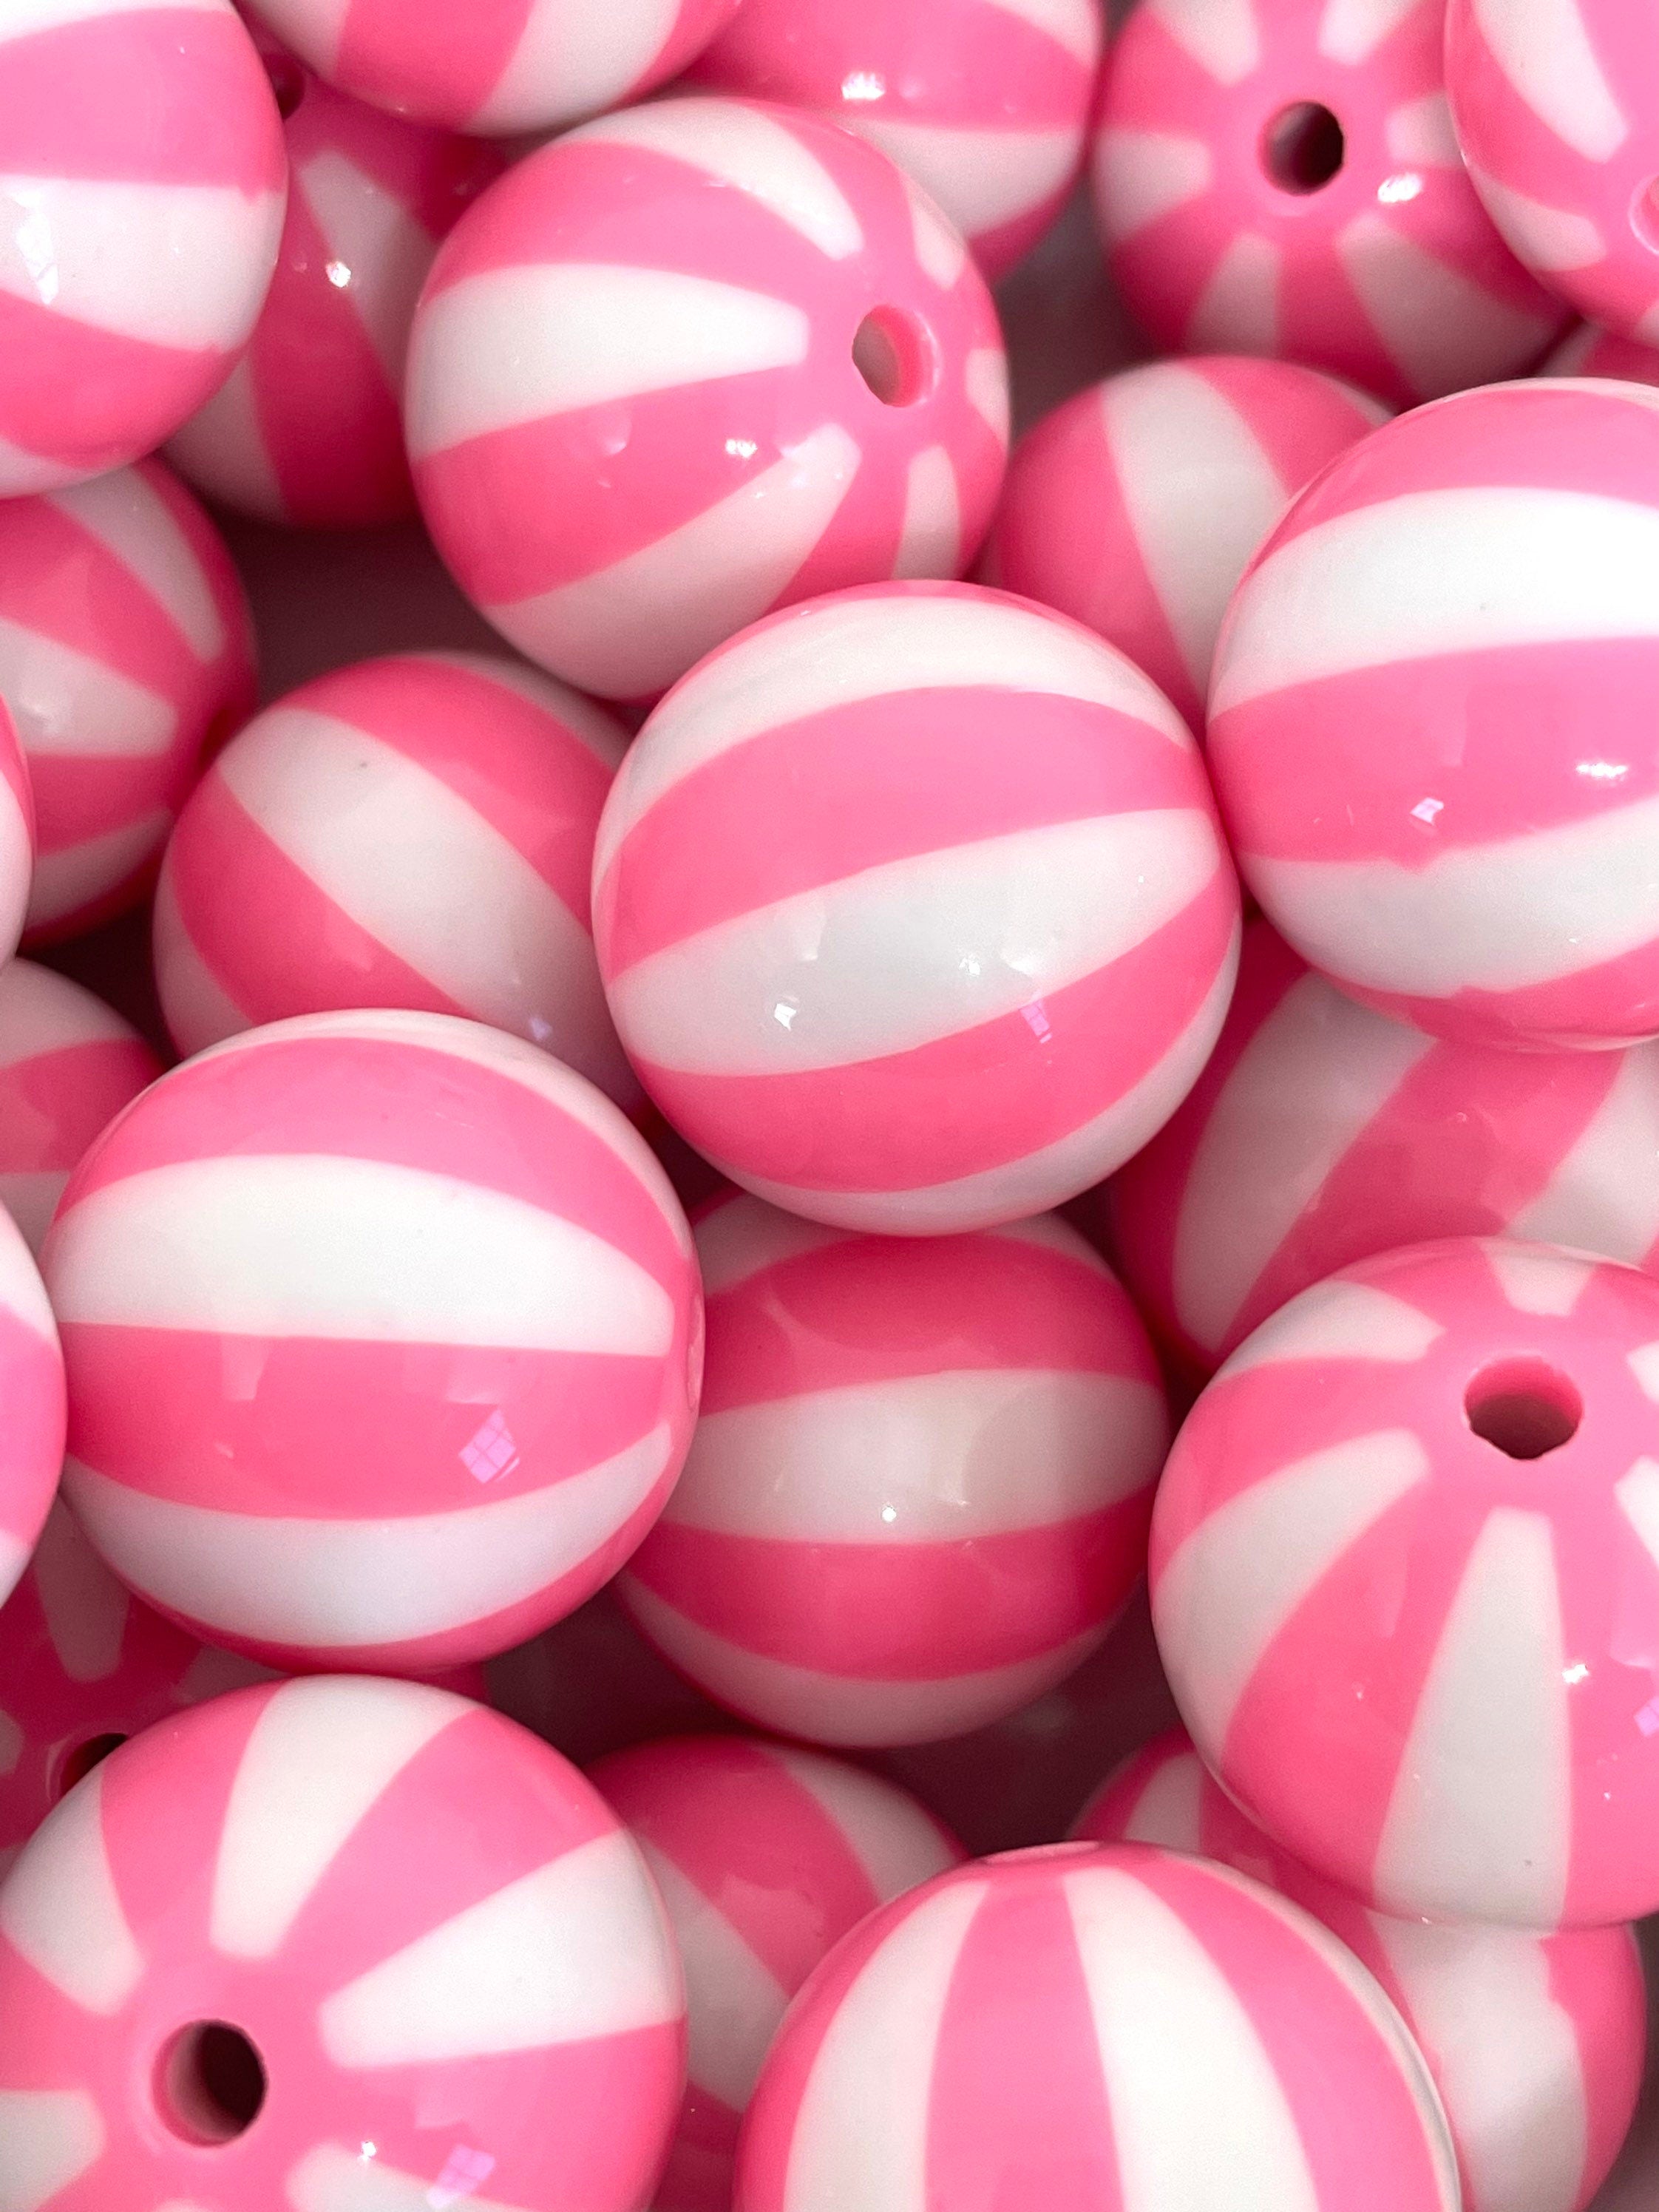 Cotton Candy Beach Ball Beads, Gender Reveal Beads for Party, Chunky Beads for Jewelry Making, Pink and Blue Beads, 20mm Beads, Kawaii Beads